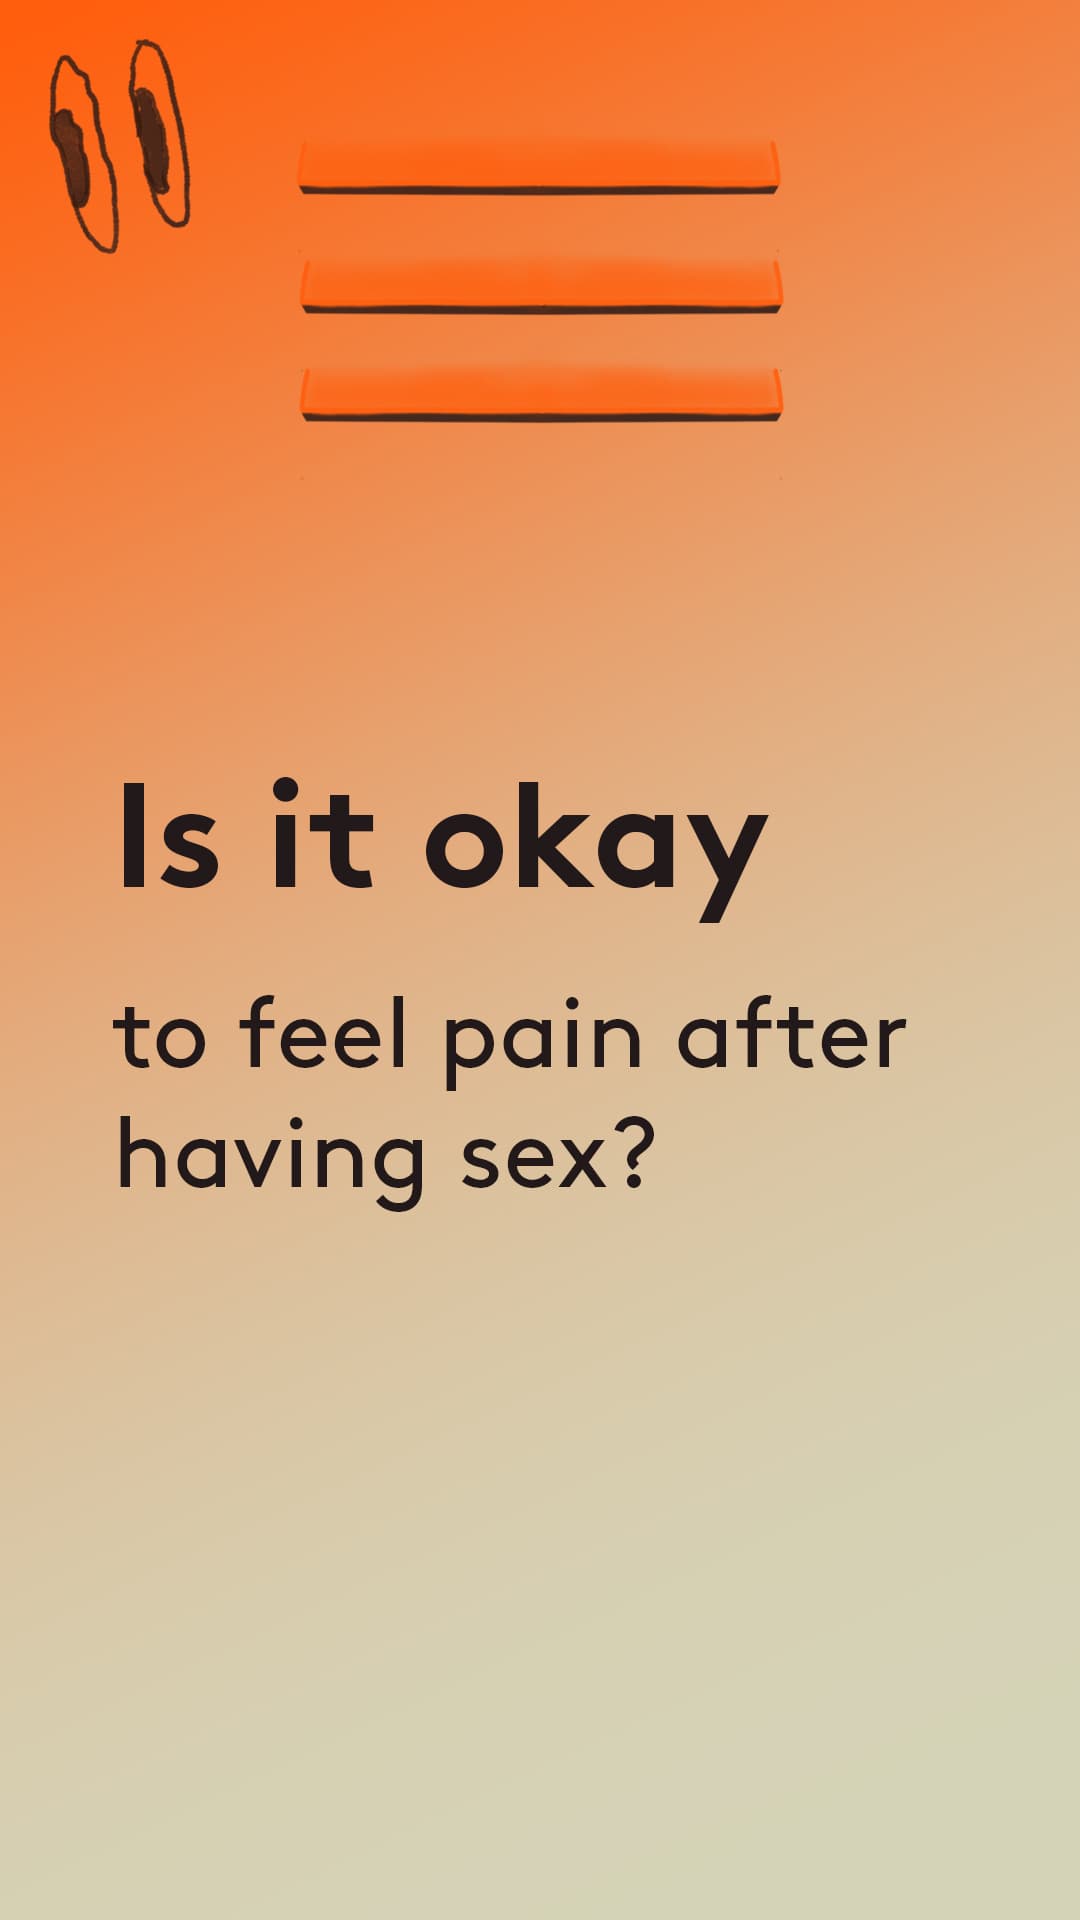 Is it okay to feel pain after having sex?